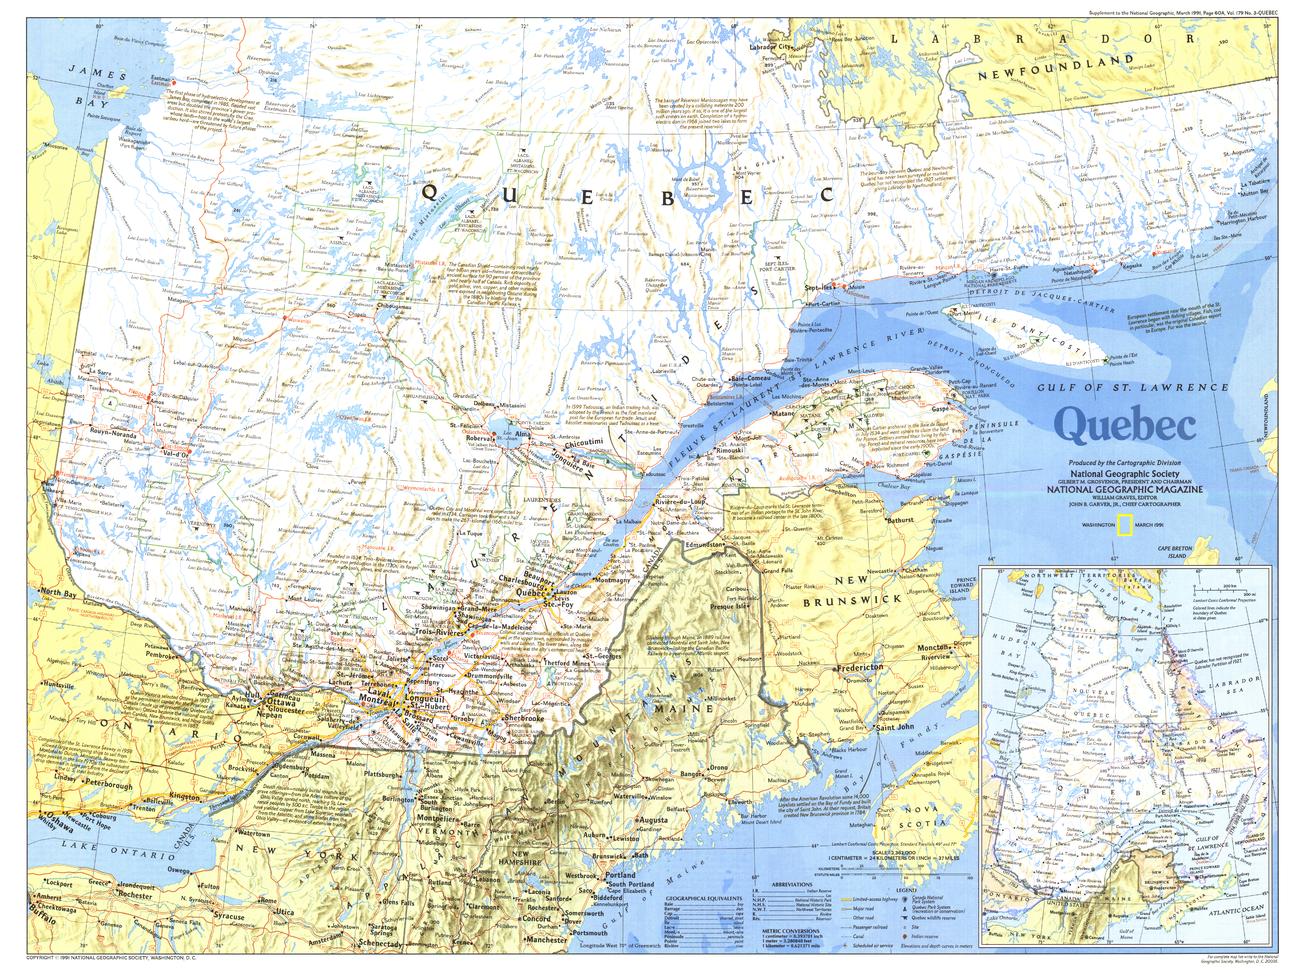 Quebec Map Published 1991 by National Geographic | Shop Mapworld